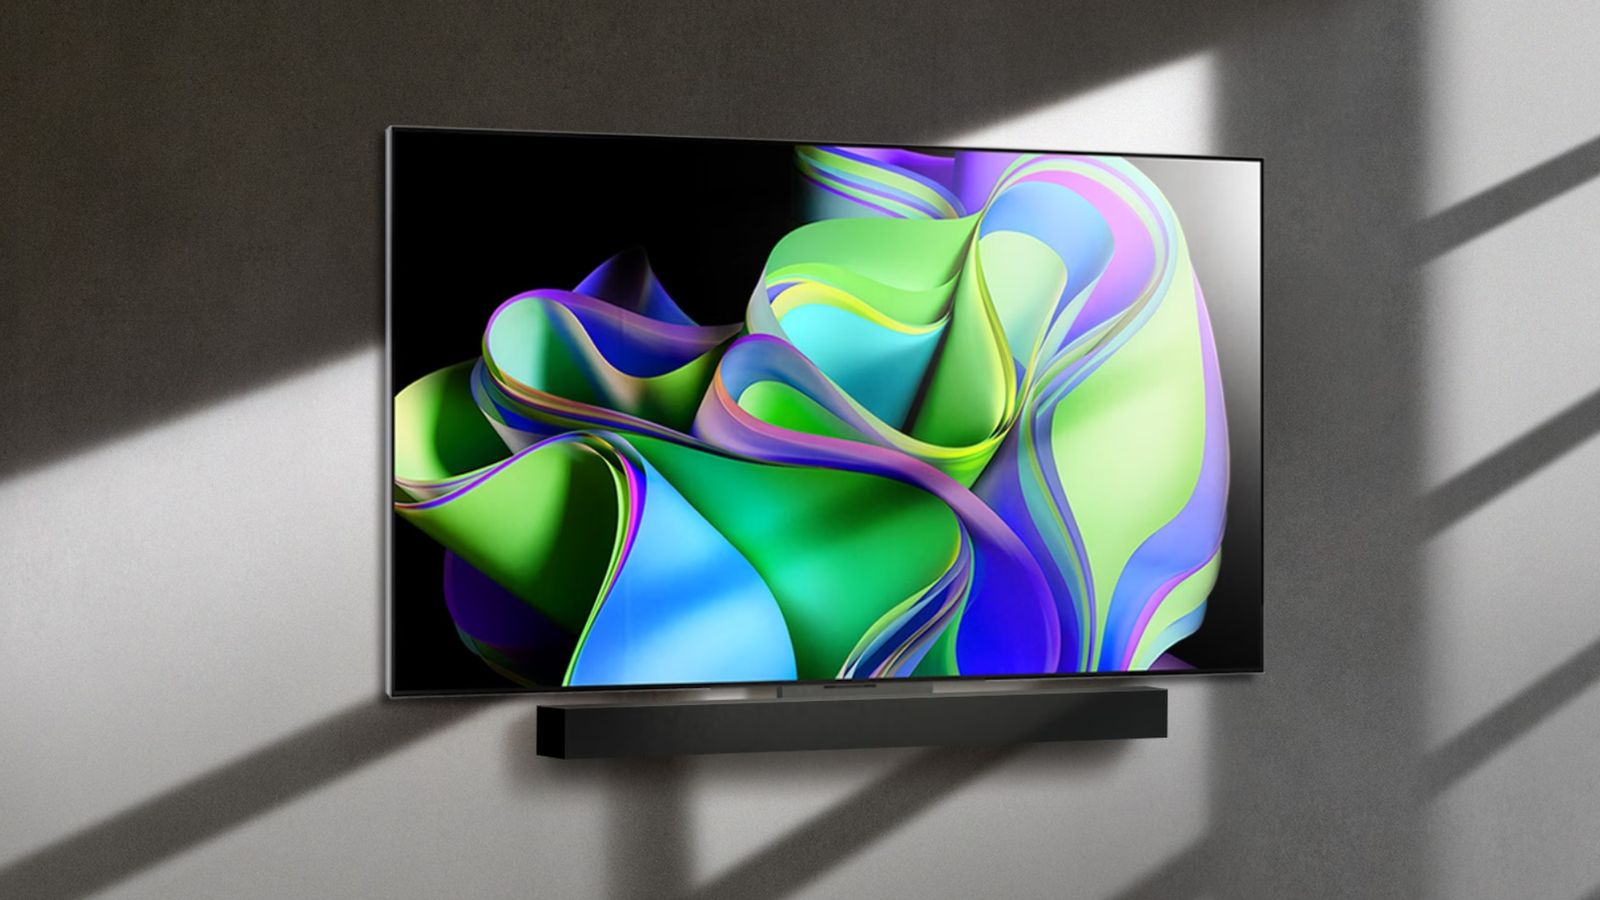 LG OLED evo C3 product image of a flatscreen TV mounted to a grey wall featuring a green, purple, and blue wavy pattern on the display.